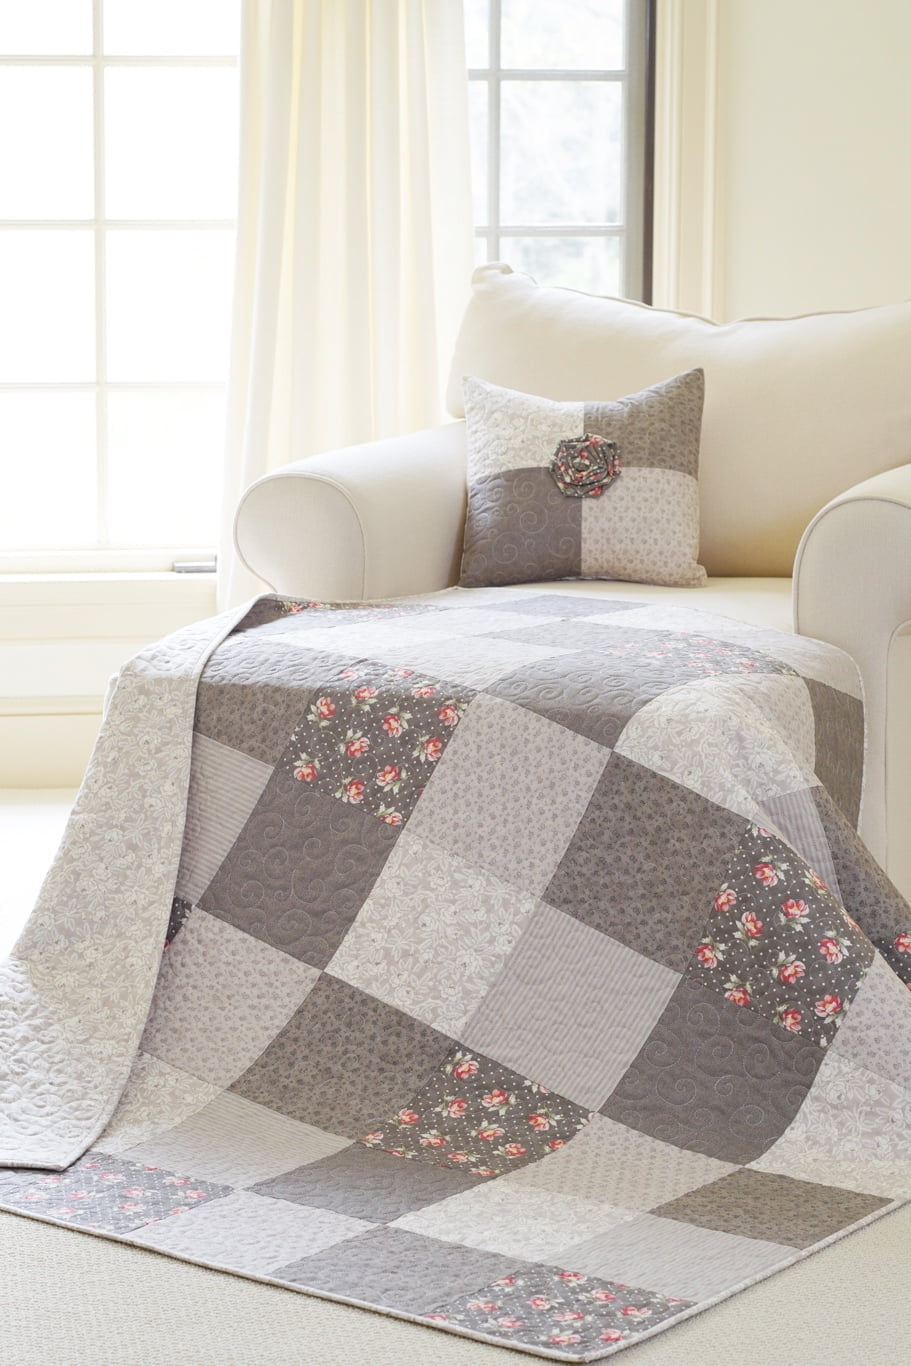 Bella Rose quilt pattern picture